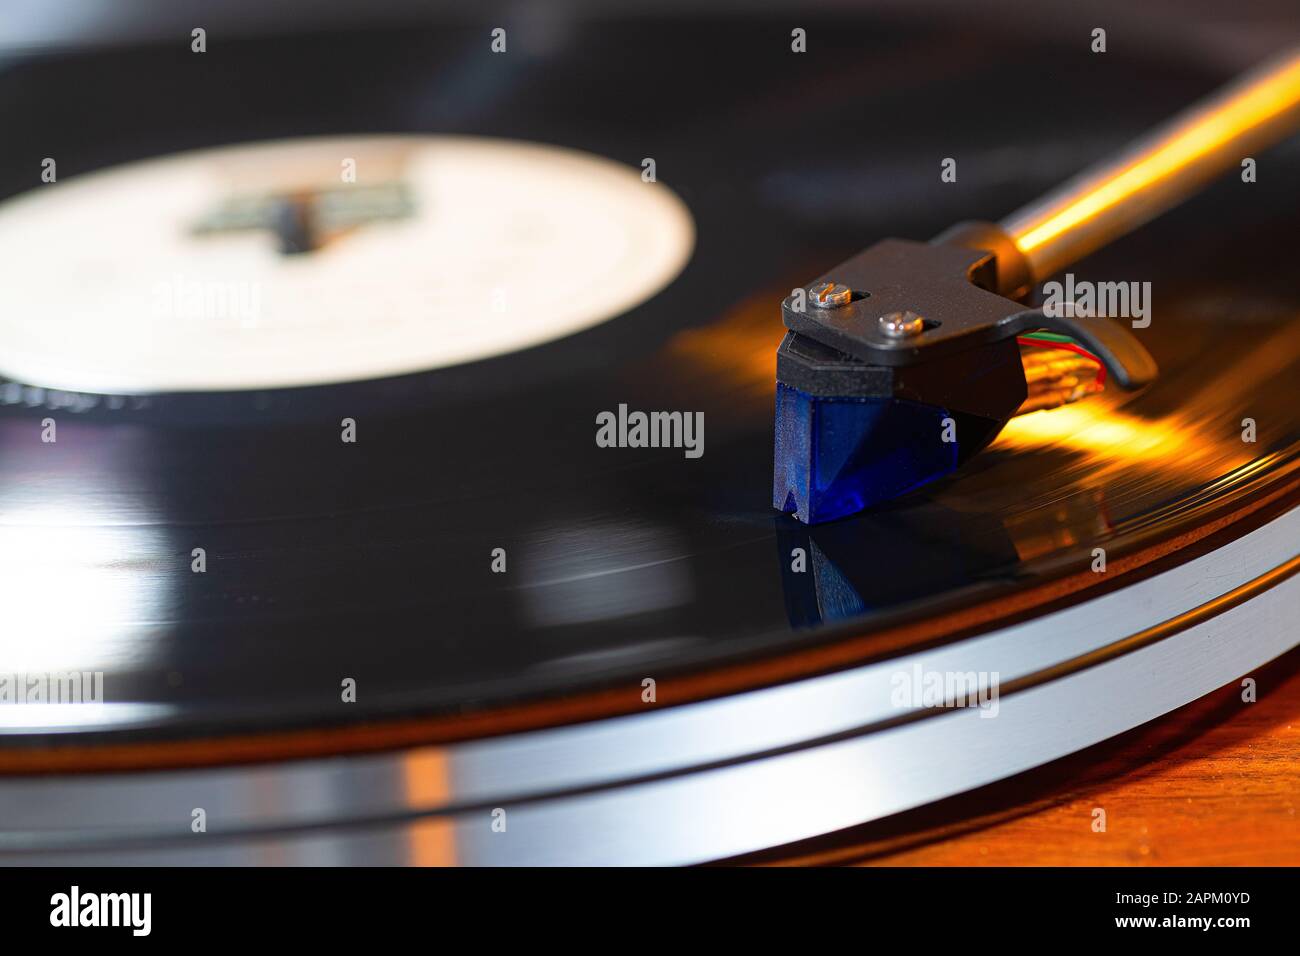 Closeup shot of a headshell of modern gramophone with a blurred background Stock Photo